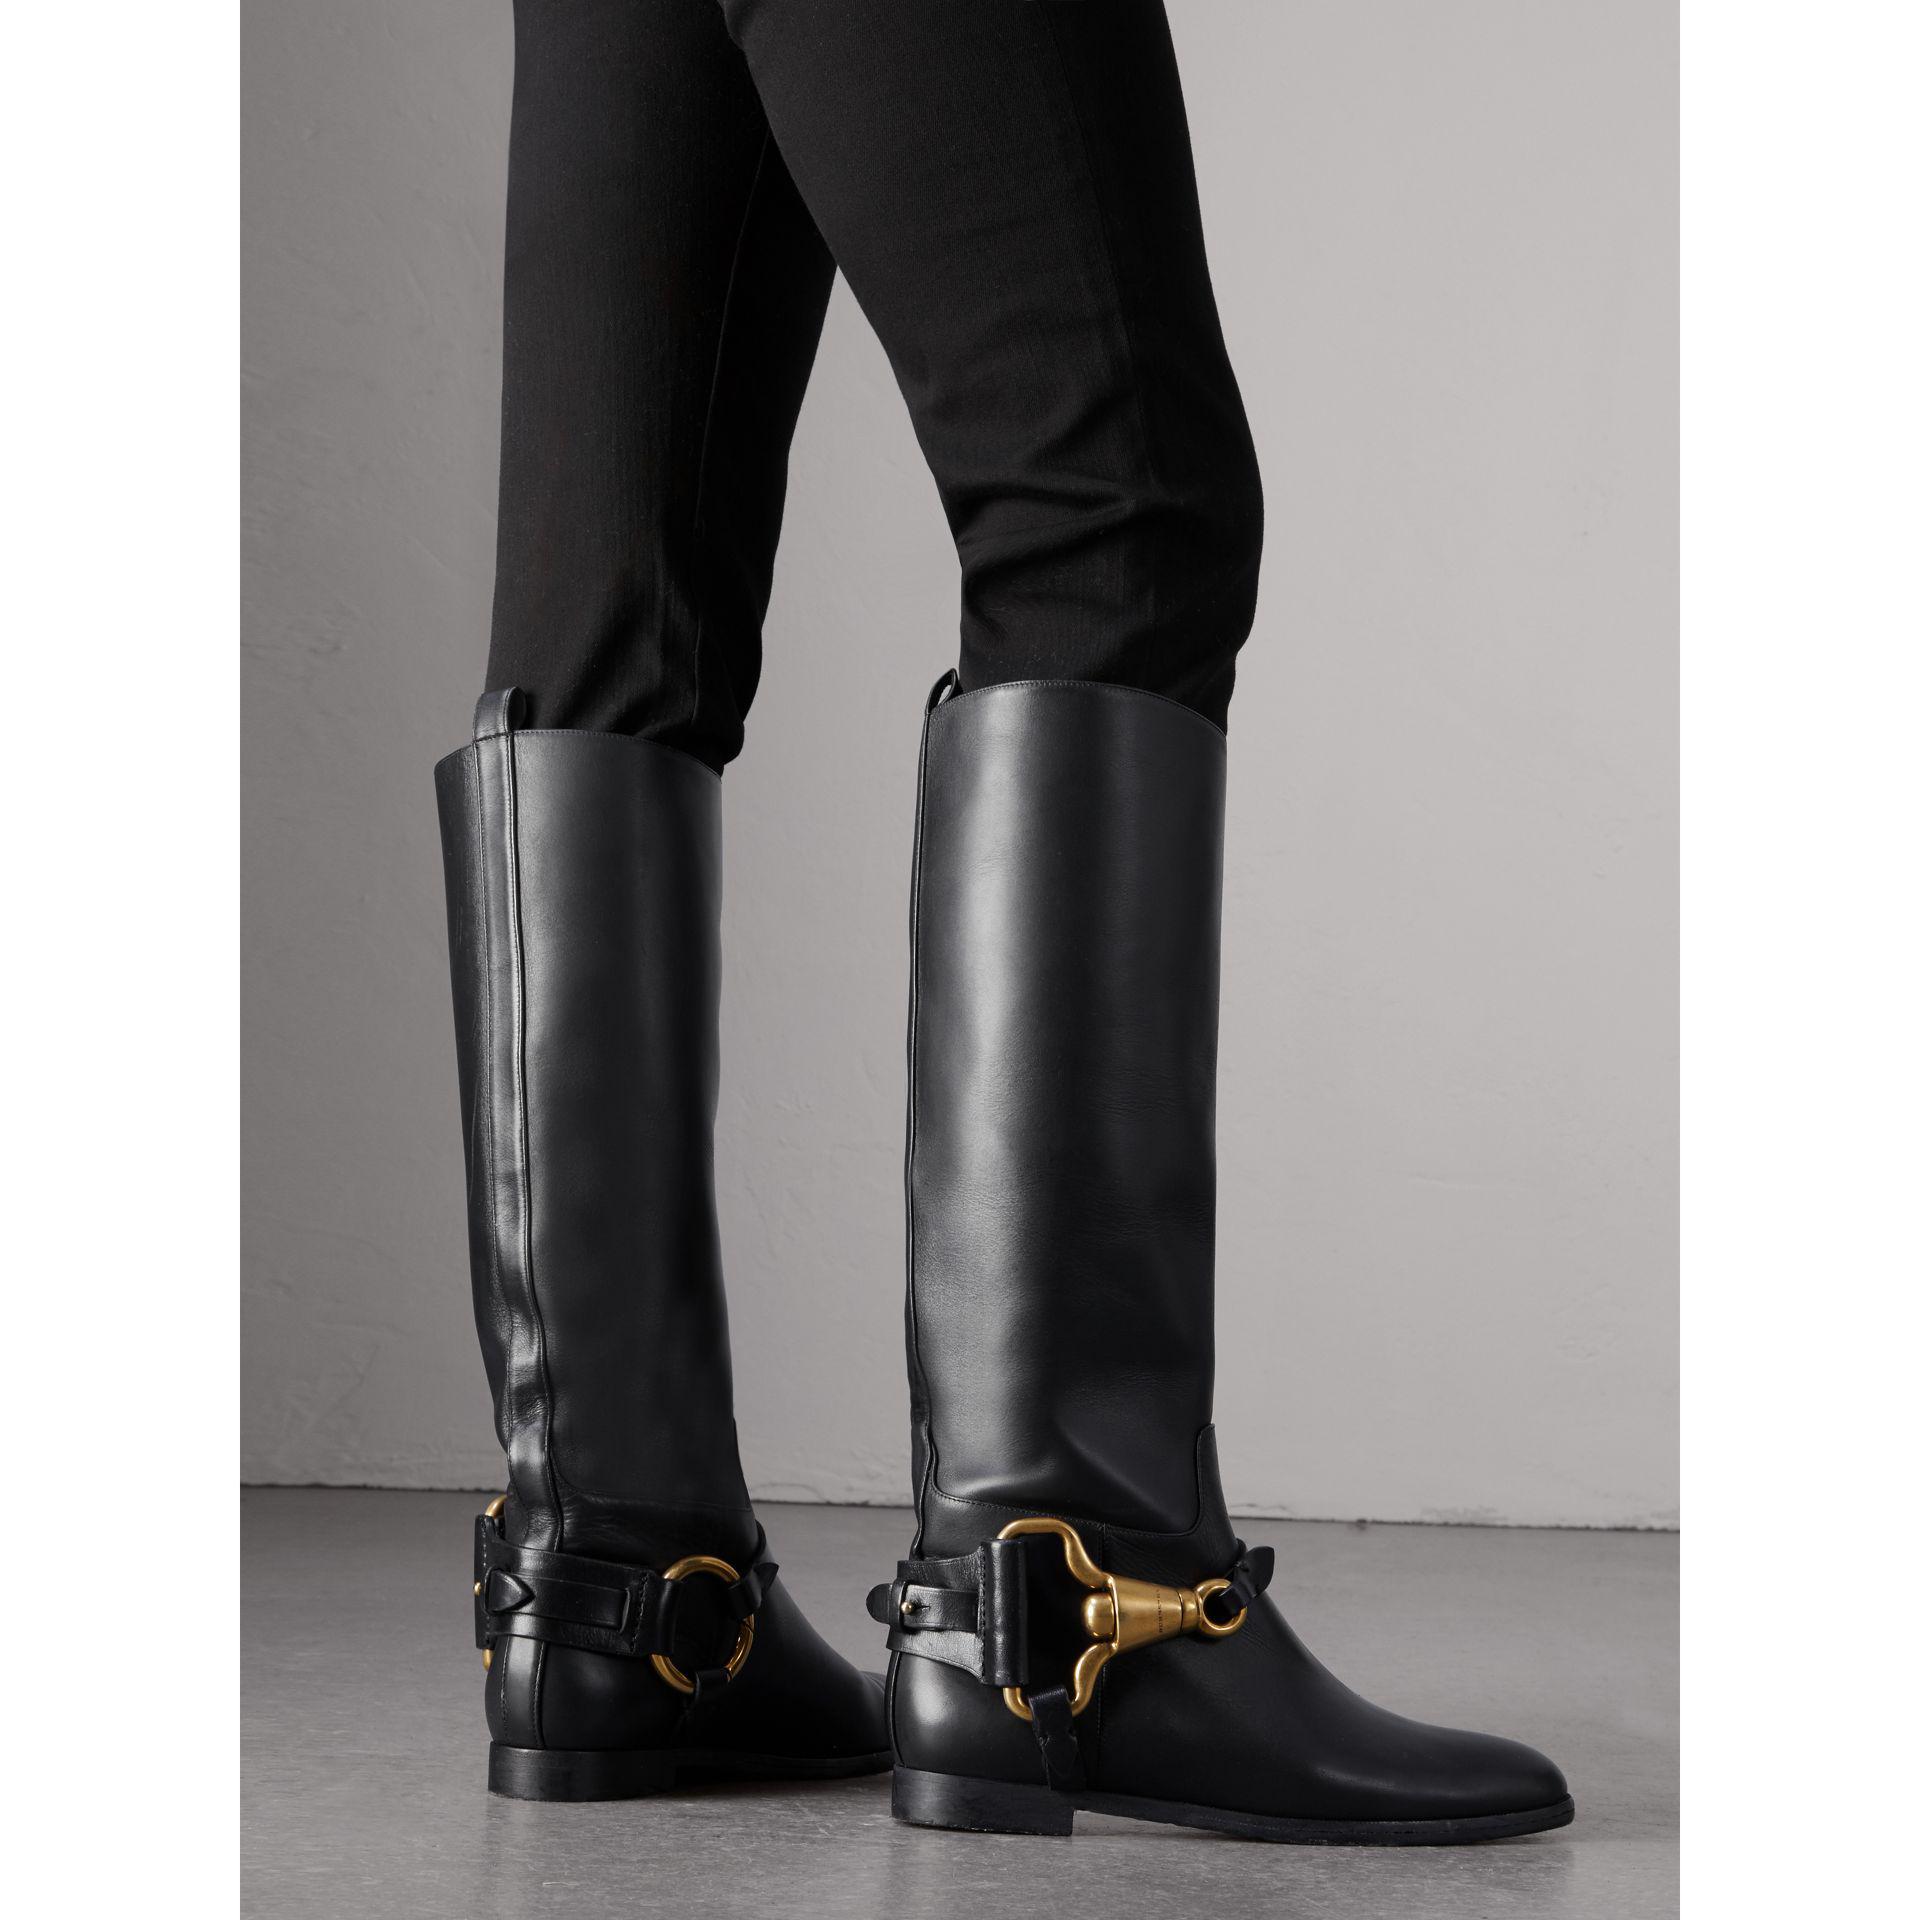 burberry tall boots